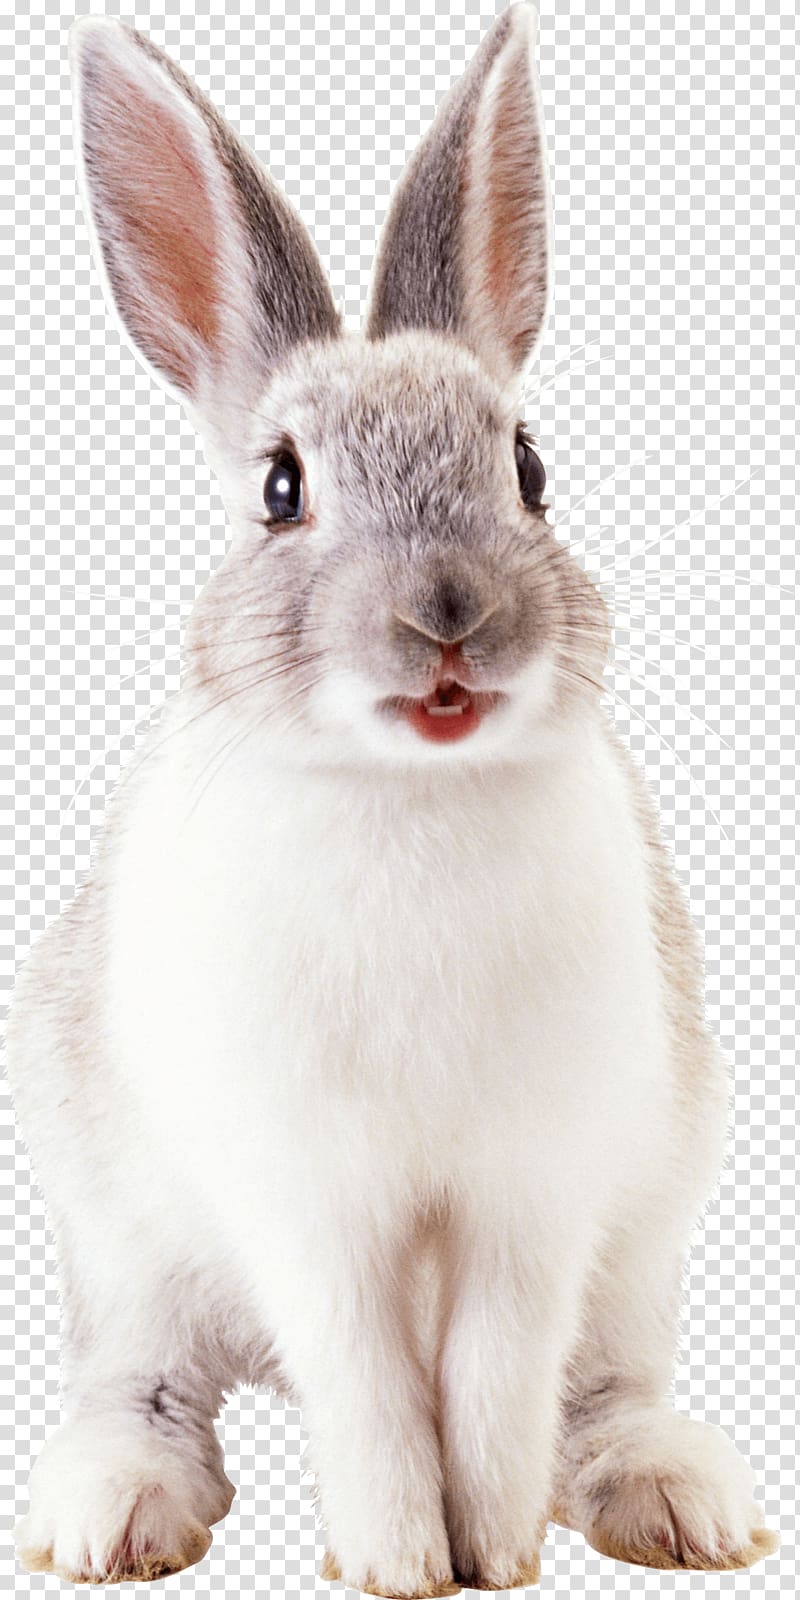 white and gray rabbit on surface, Rabbit , White Rabbit transparent background PNG clipart